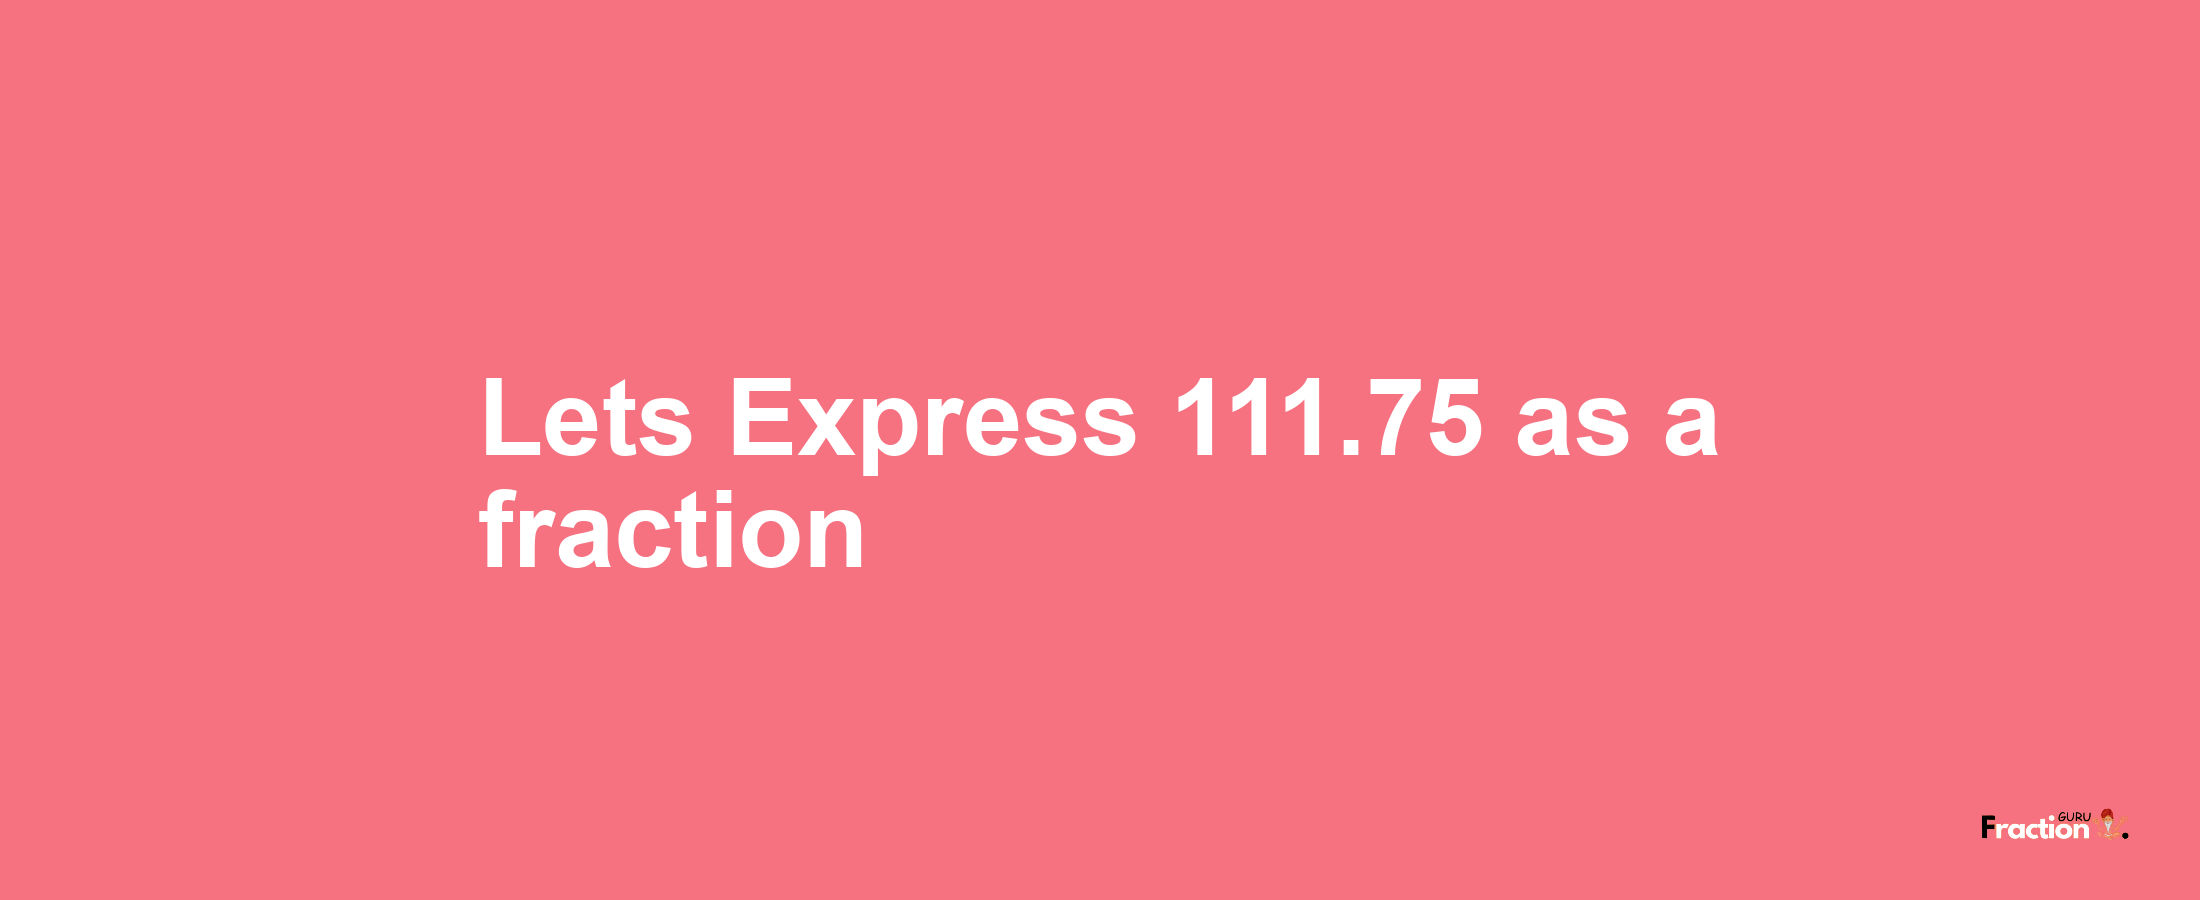 Lets Express 111.75 as afraction